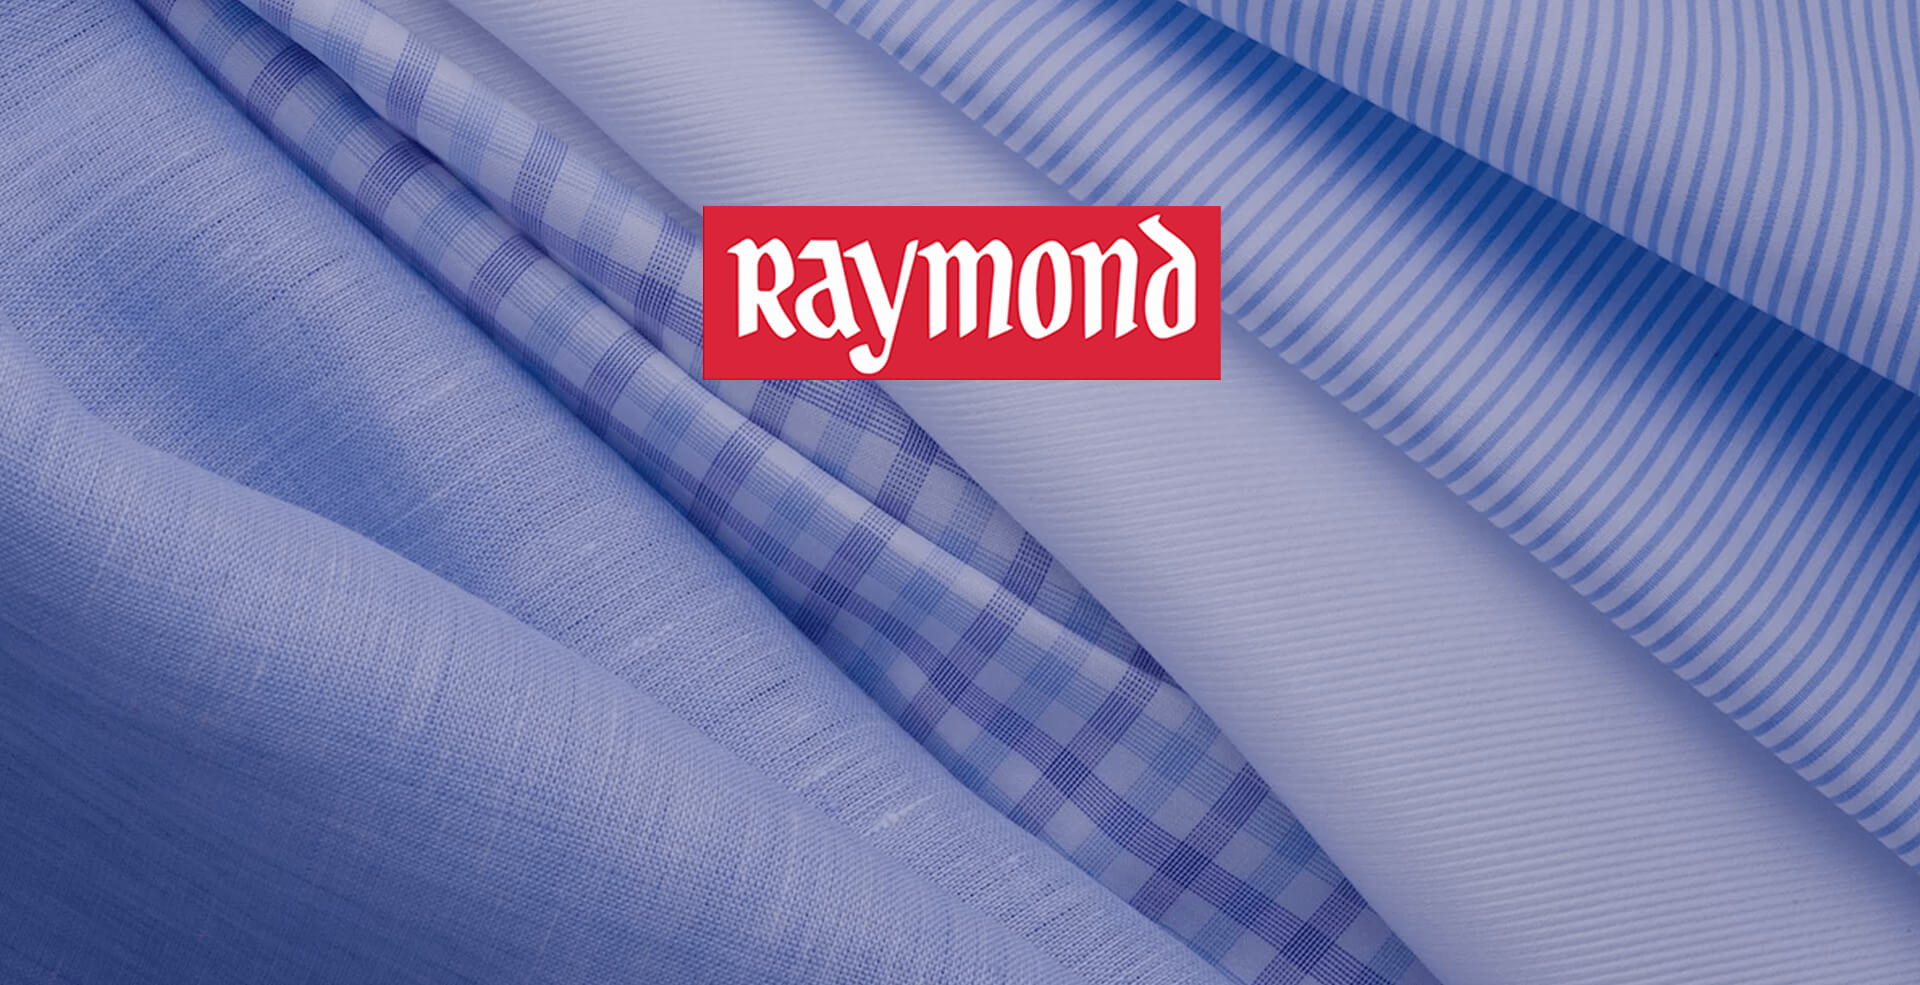 RAYMOND Bienester Merino Wool Unstitched Suiting Fabric in Delhi at best  price by B Kumar & Sons - Justdial